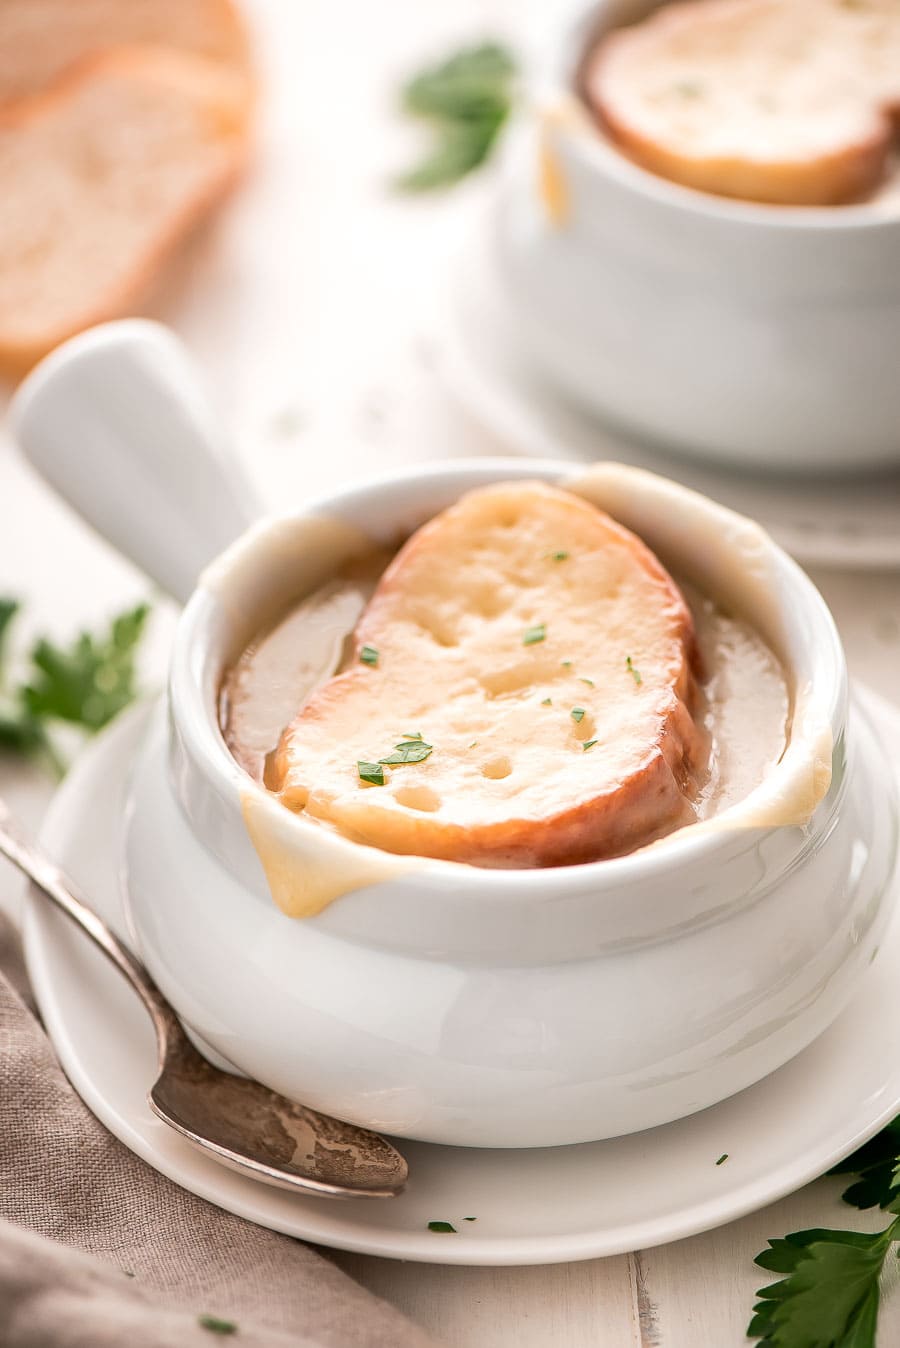 Homemade French Onion Soup topped with cheesy bread